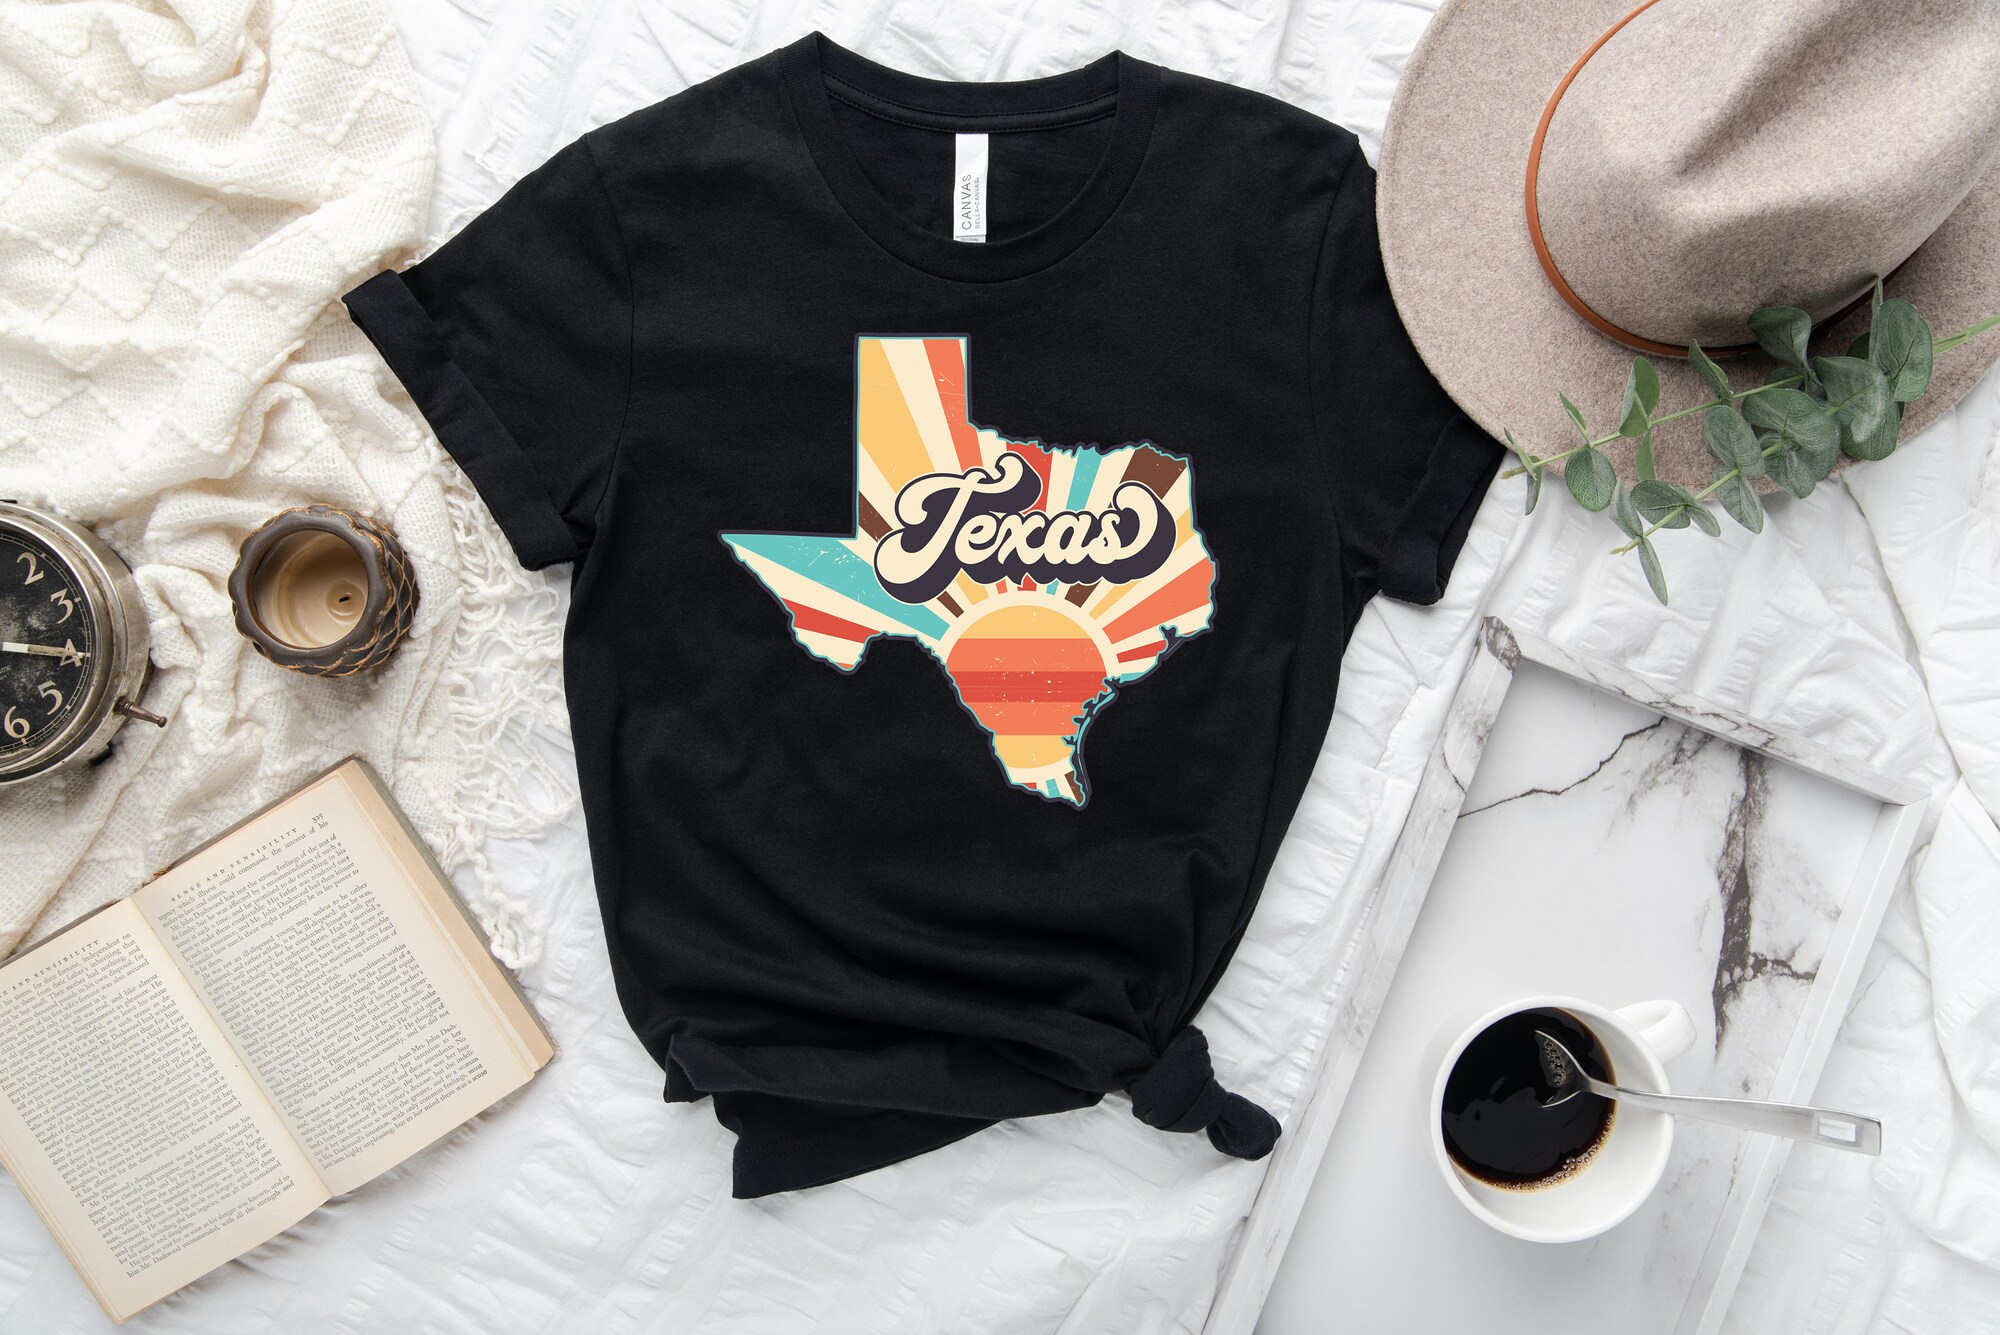 Discover Vintage Texas Shirt, Texas Fan Shirt, Vintage T Shirt, Texas Pride, College Student Gifts, State Shirts, Texas T-Shirt, Texas Cities Shirt